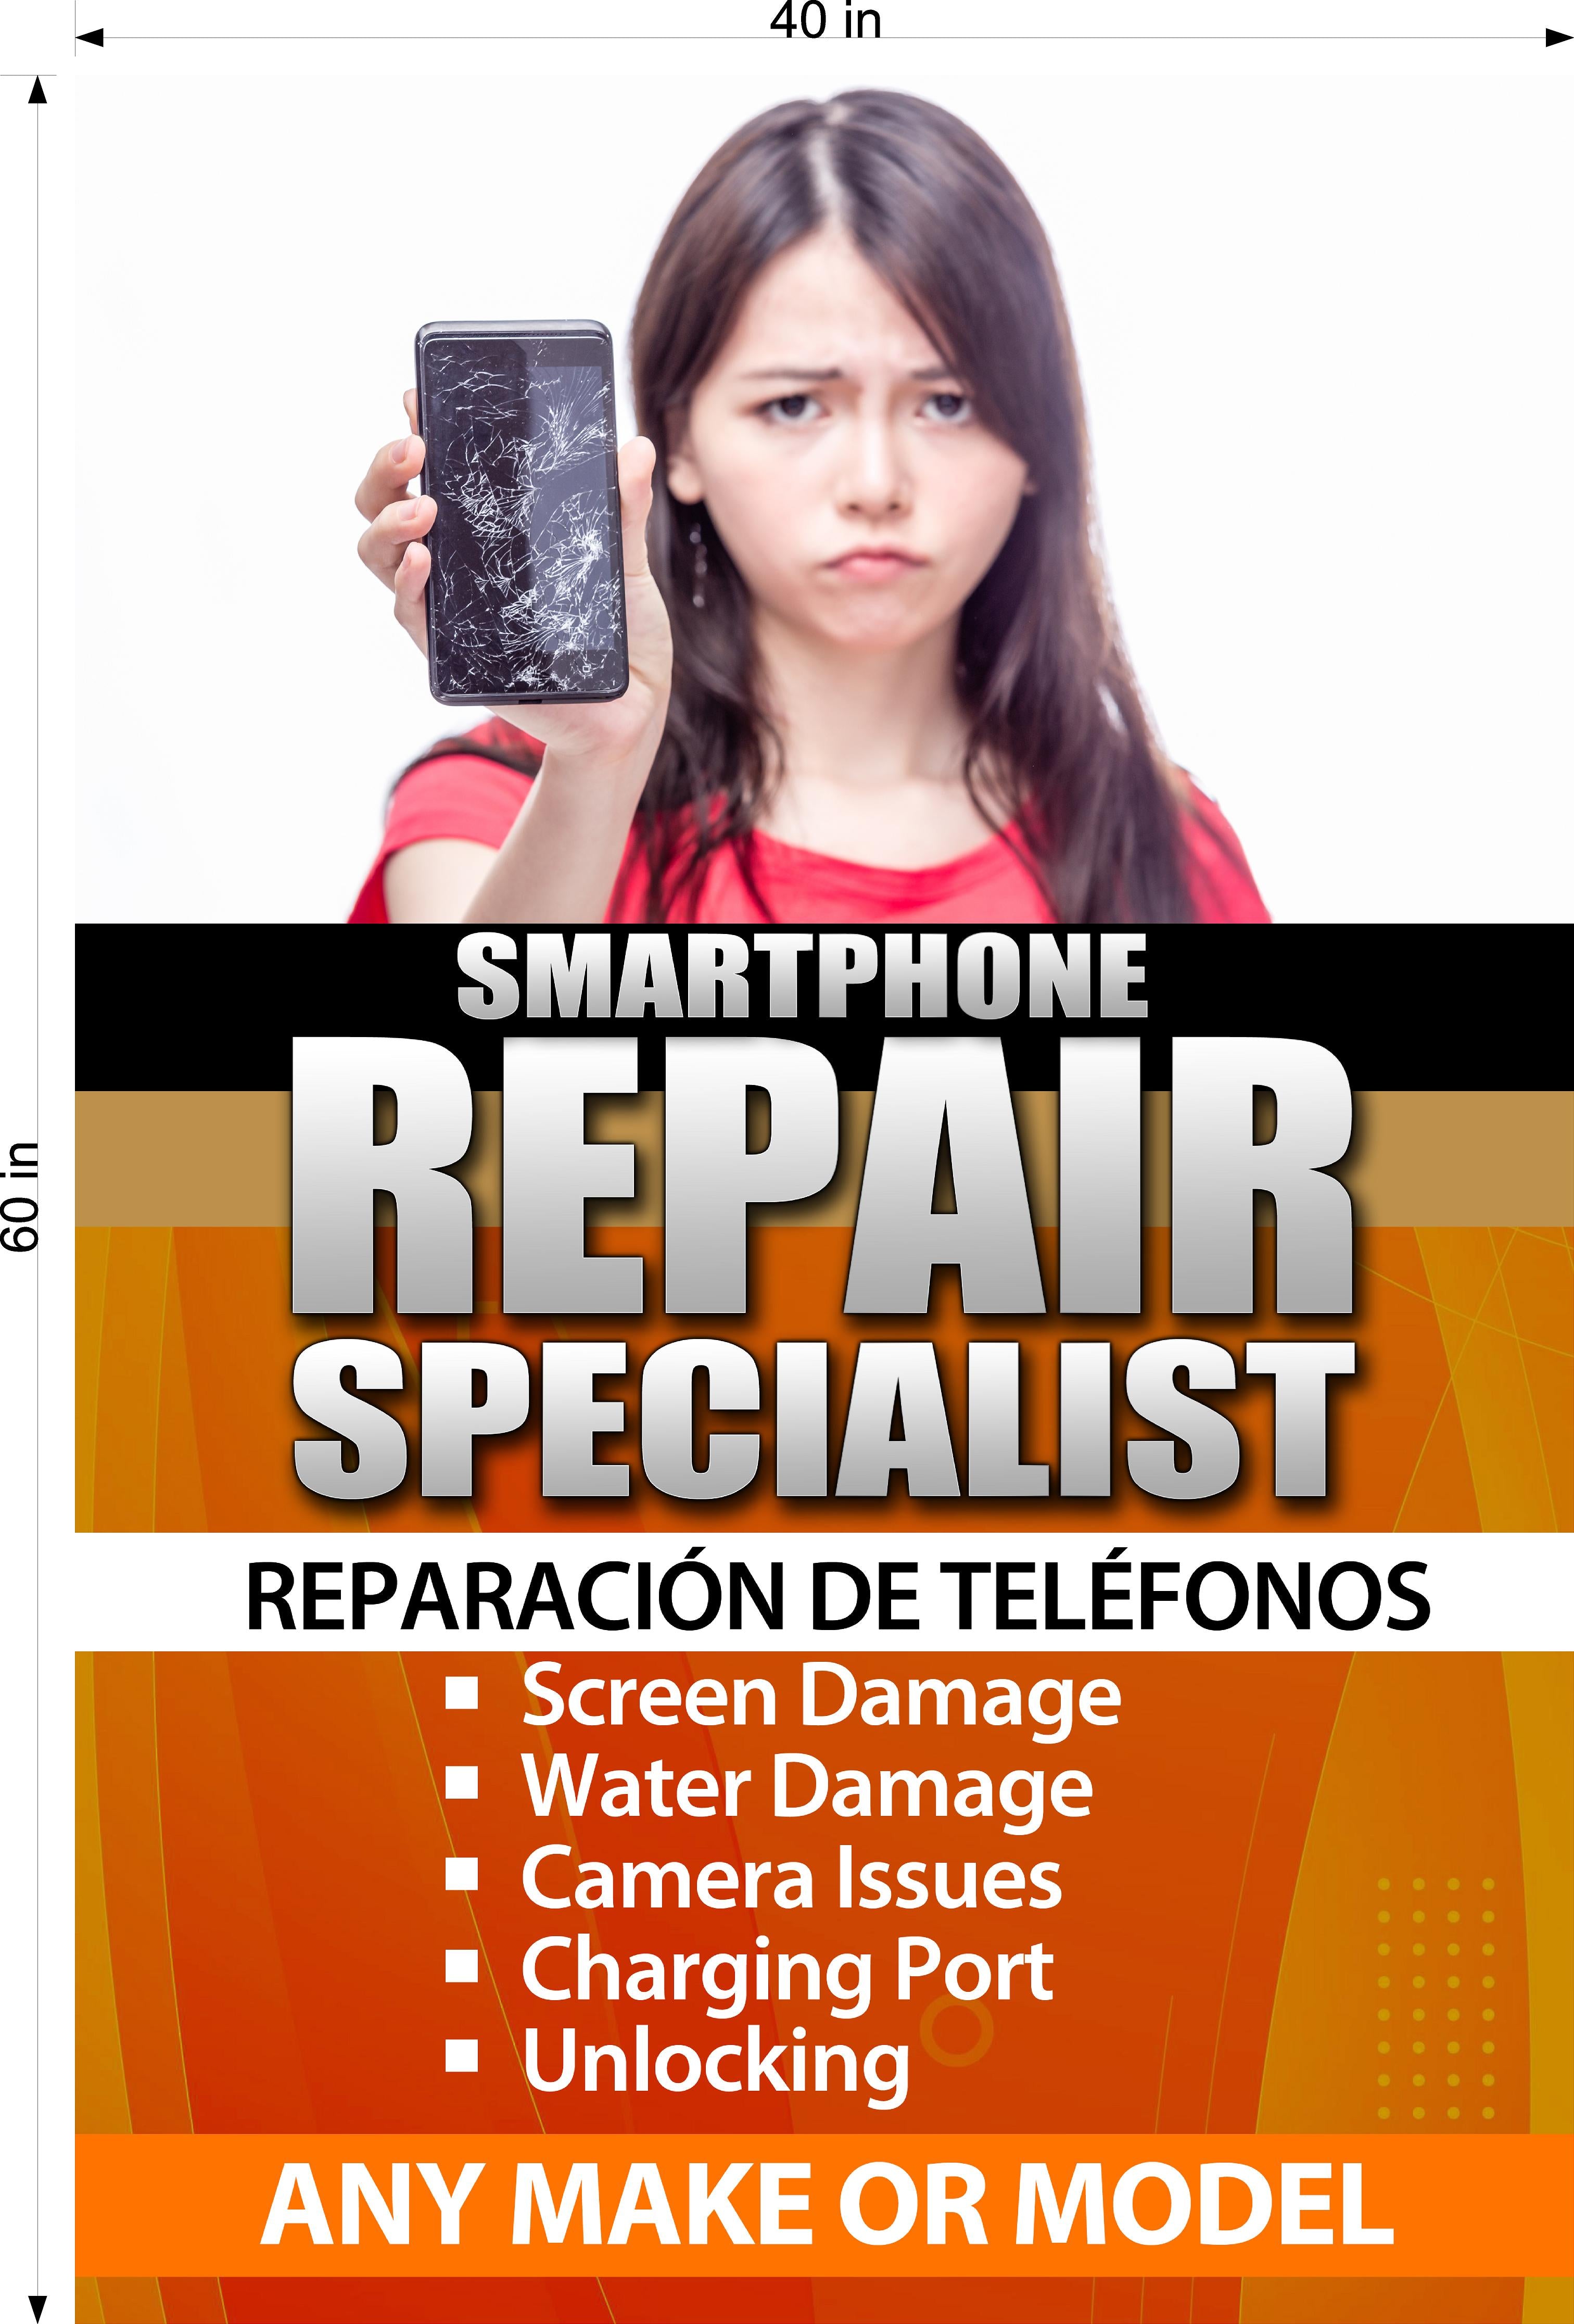 Phone Repair 05 Photo-Realistic Paper Poster Premium Interior Inside Sign Fix Smartphone buy Cell Wall Window Non-Laminated Vertical